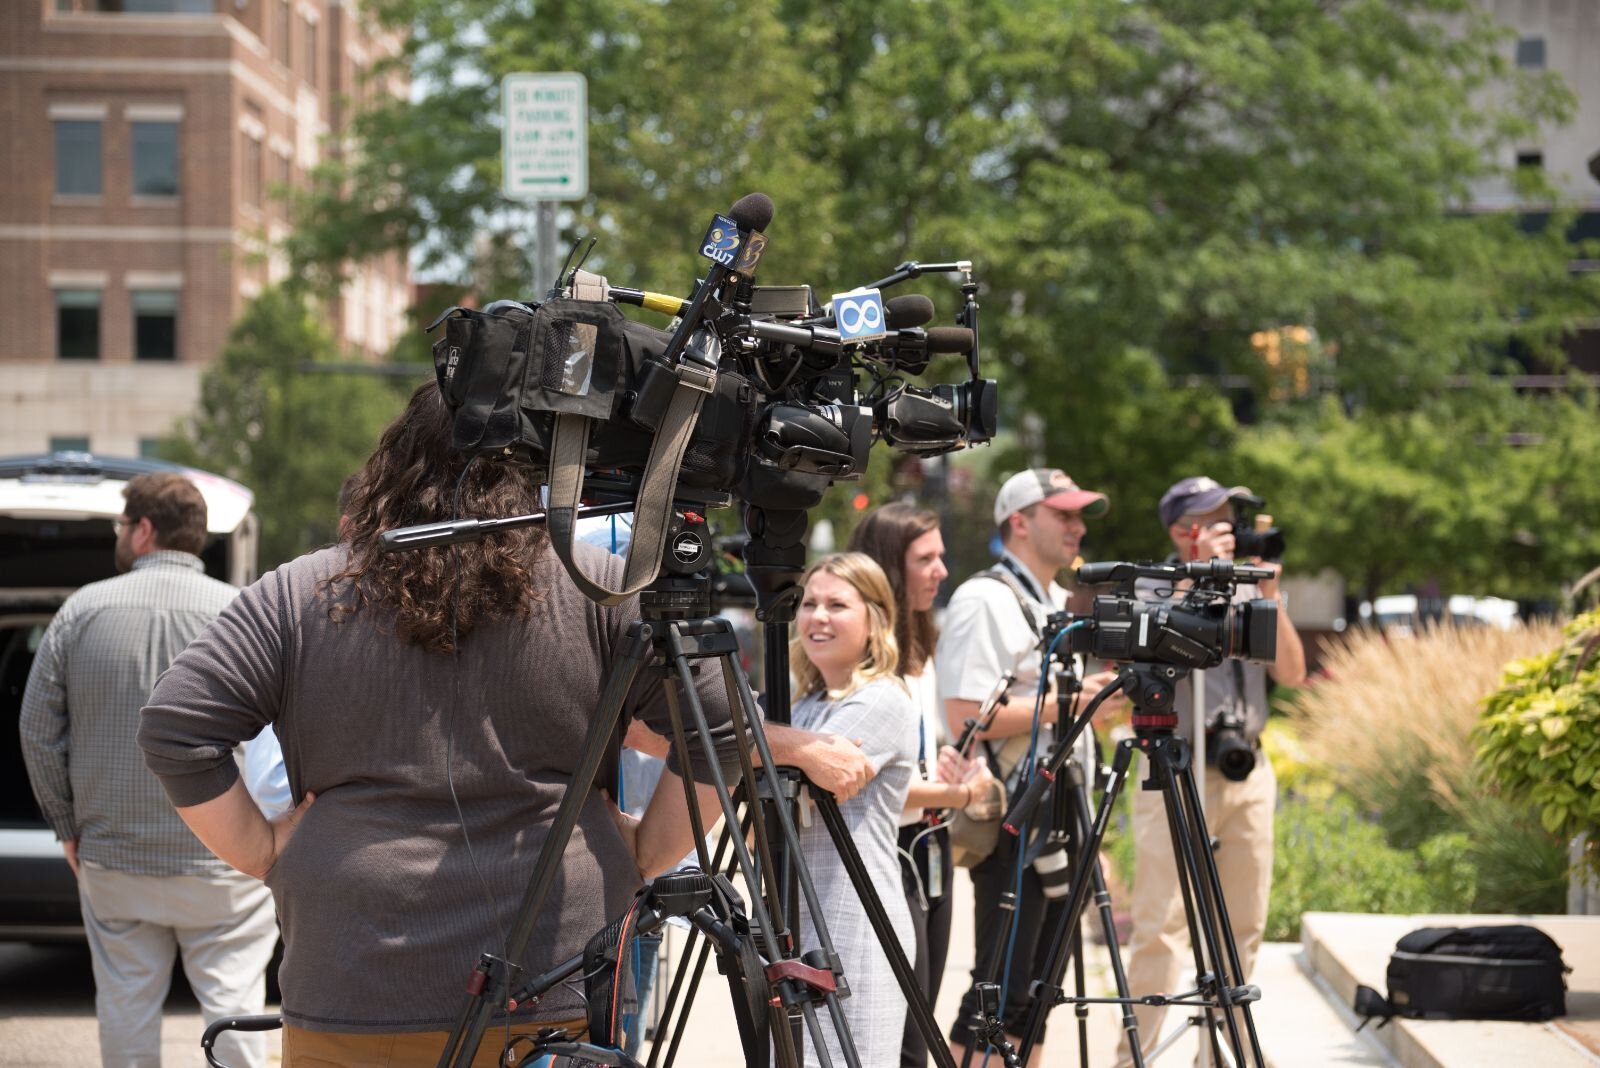 Television crews and other media were well represented at a press conference to announce a $400 million donation to the Foundation for Excellence.